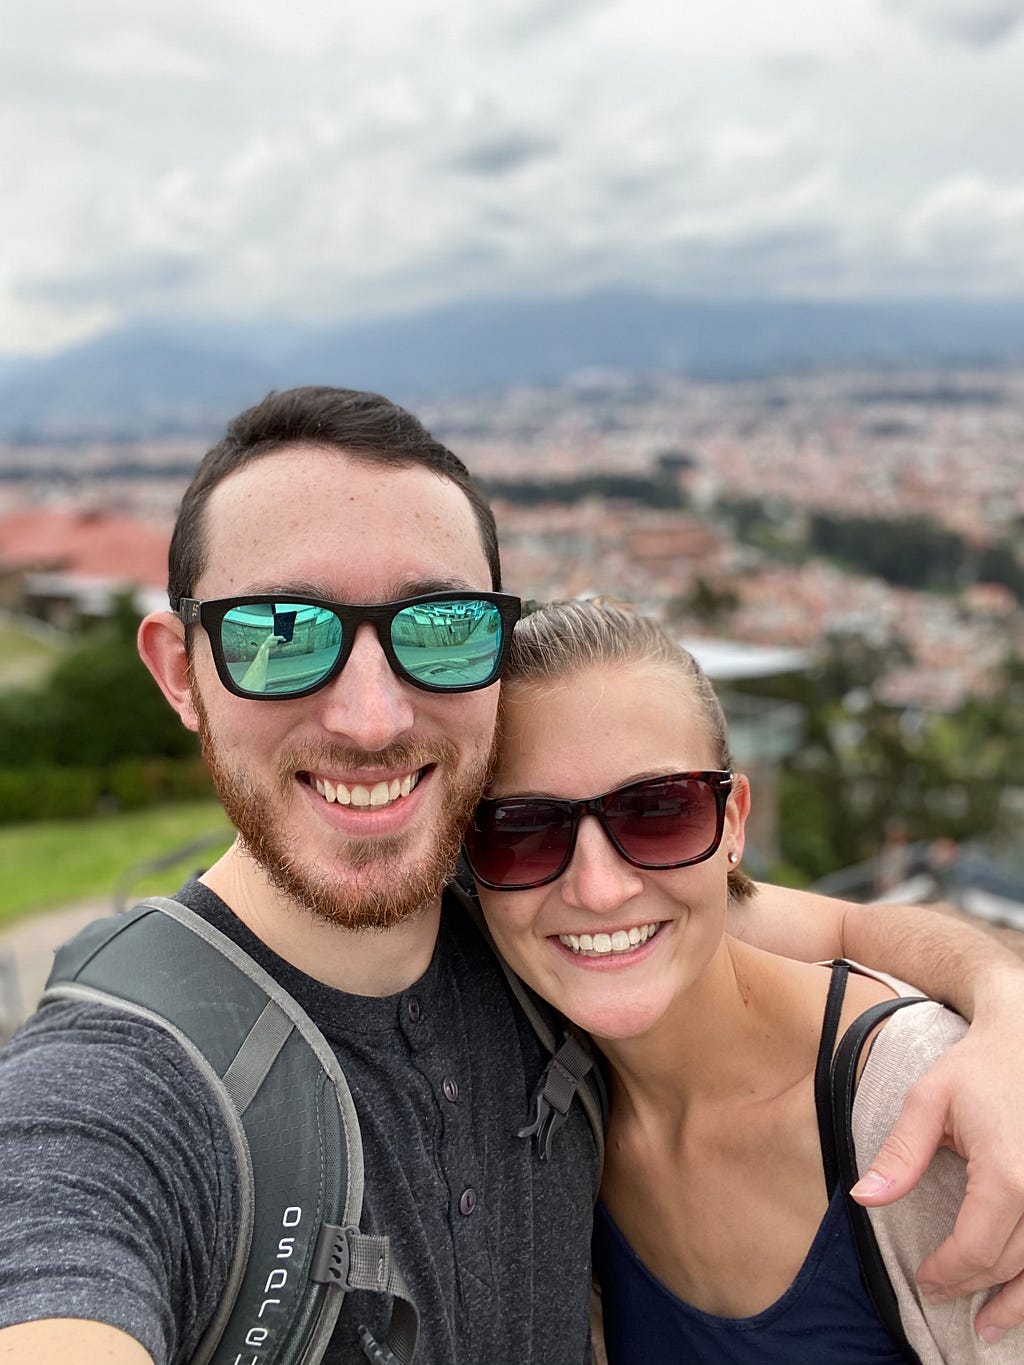 The view from Cuenca’s mirador are worth the steep climb! Pictured is a couple with the city of Cuenca sprawled below them.